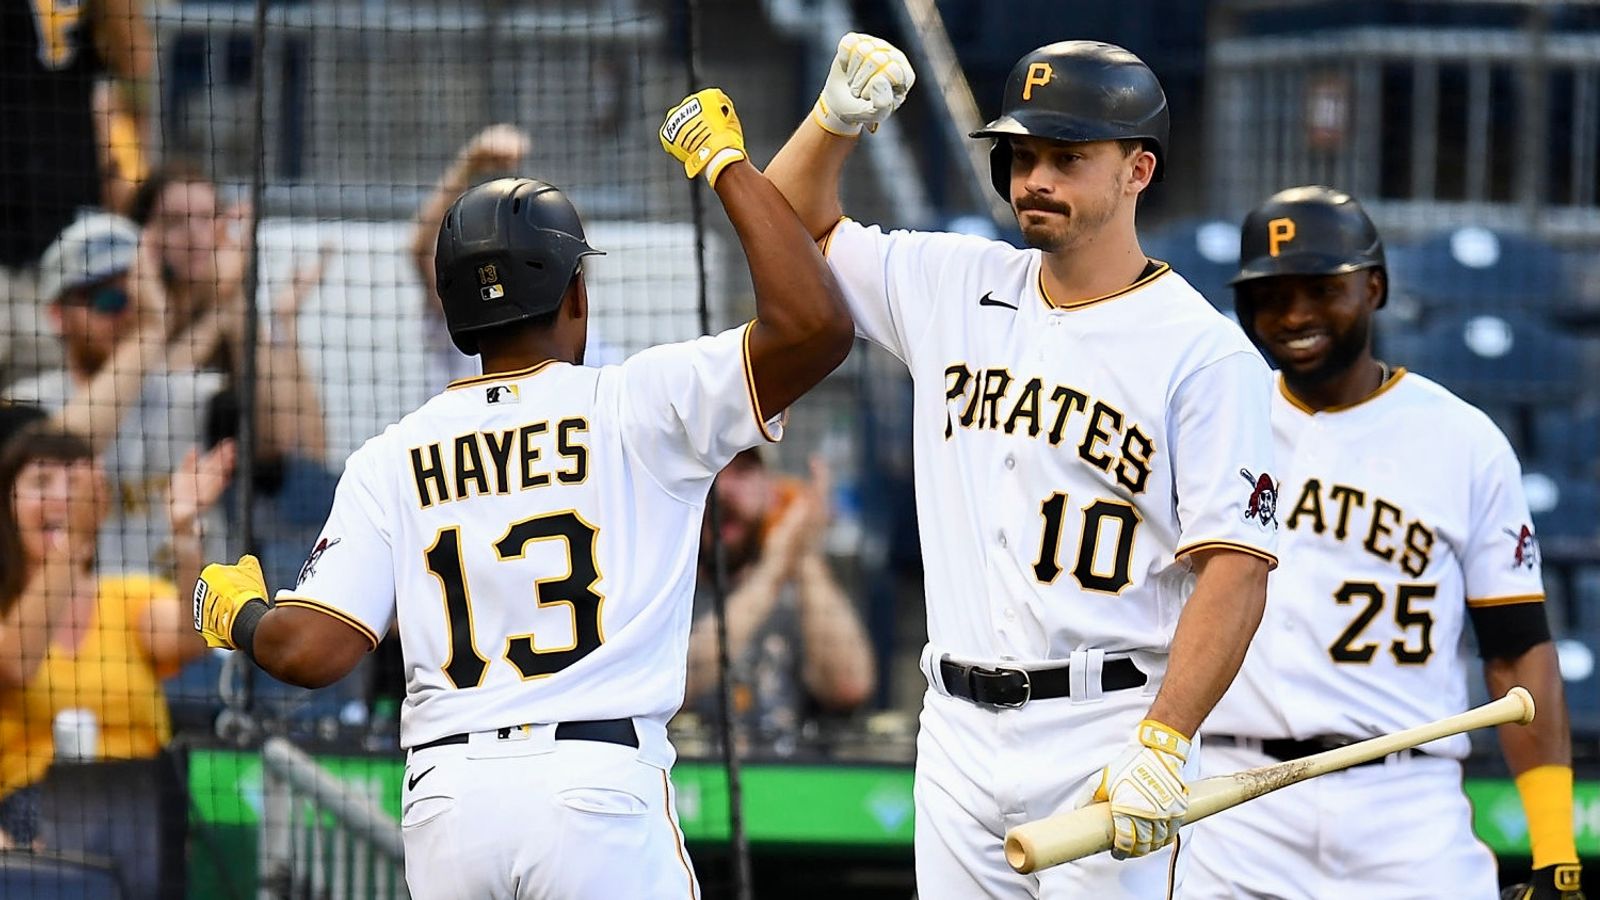 Pirates rookie Bryan Reynolds won't win Rookie of the Year, but he